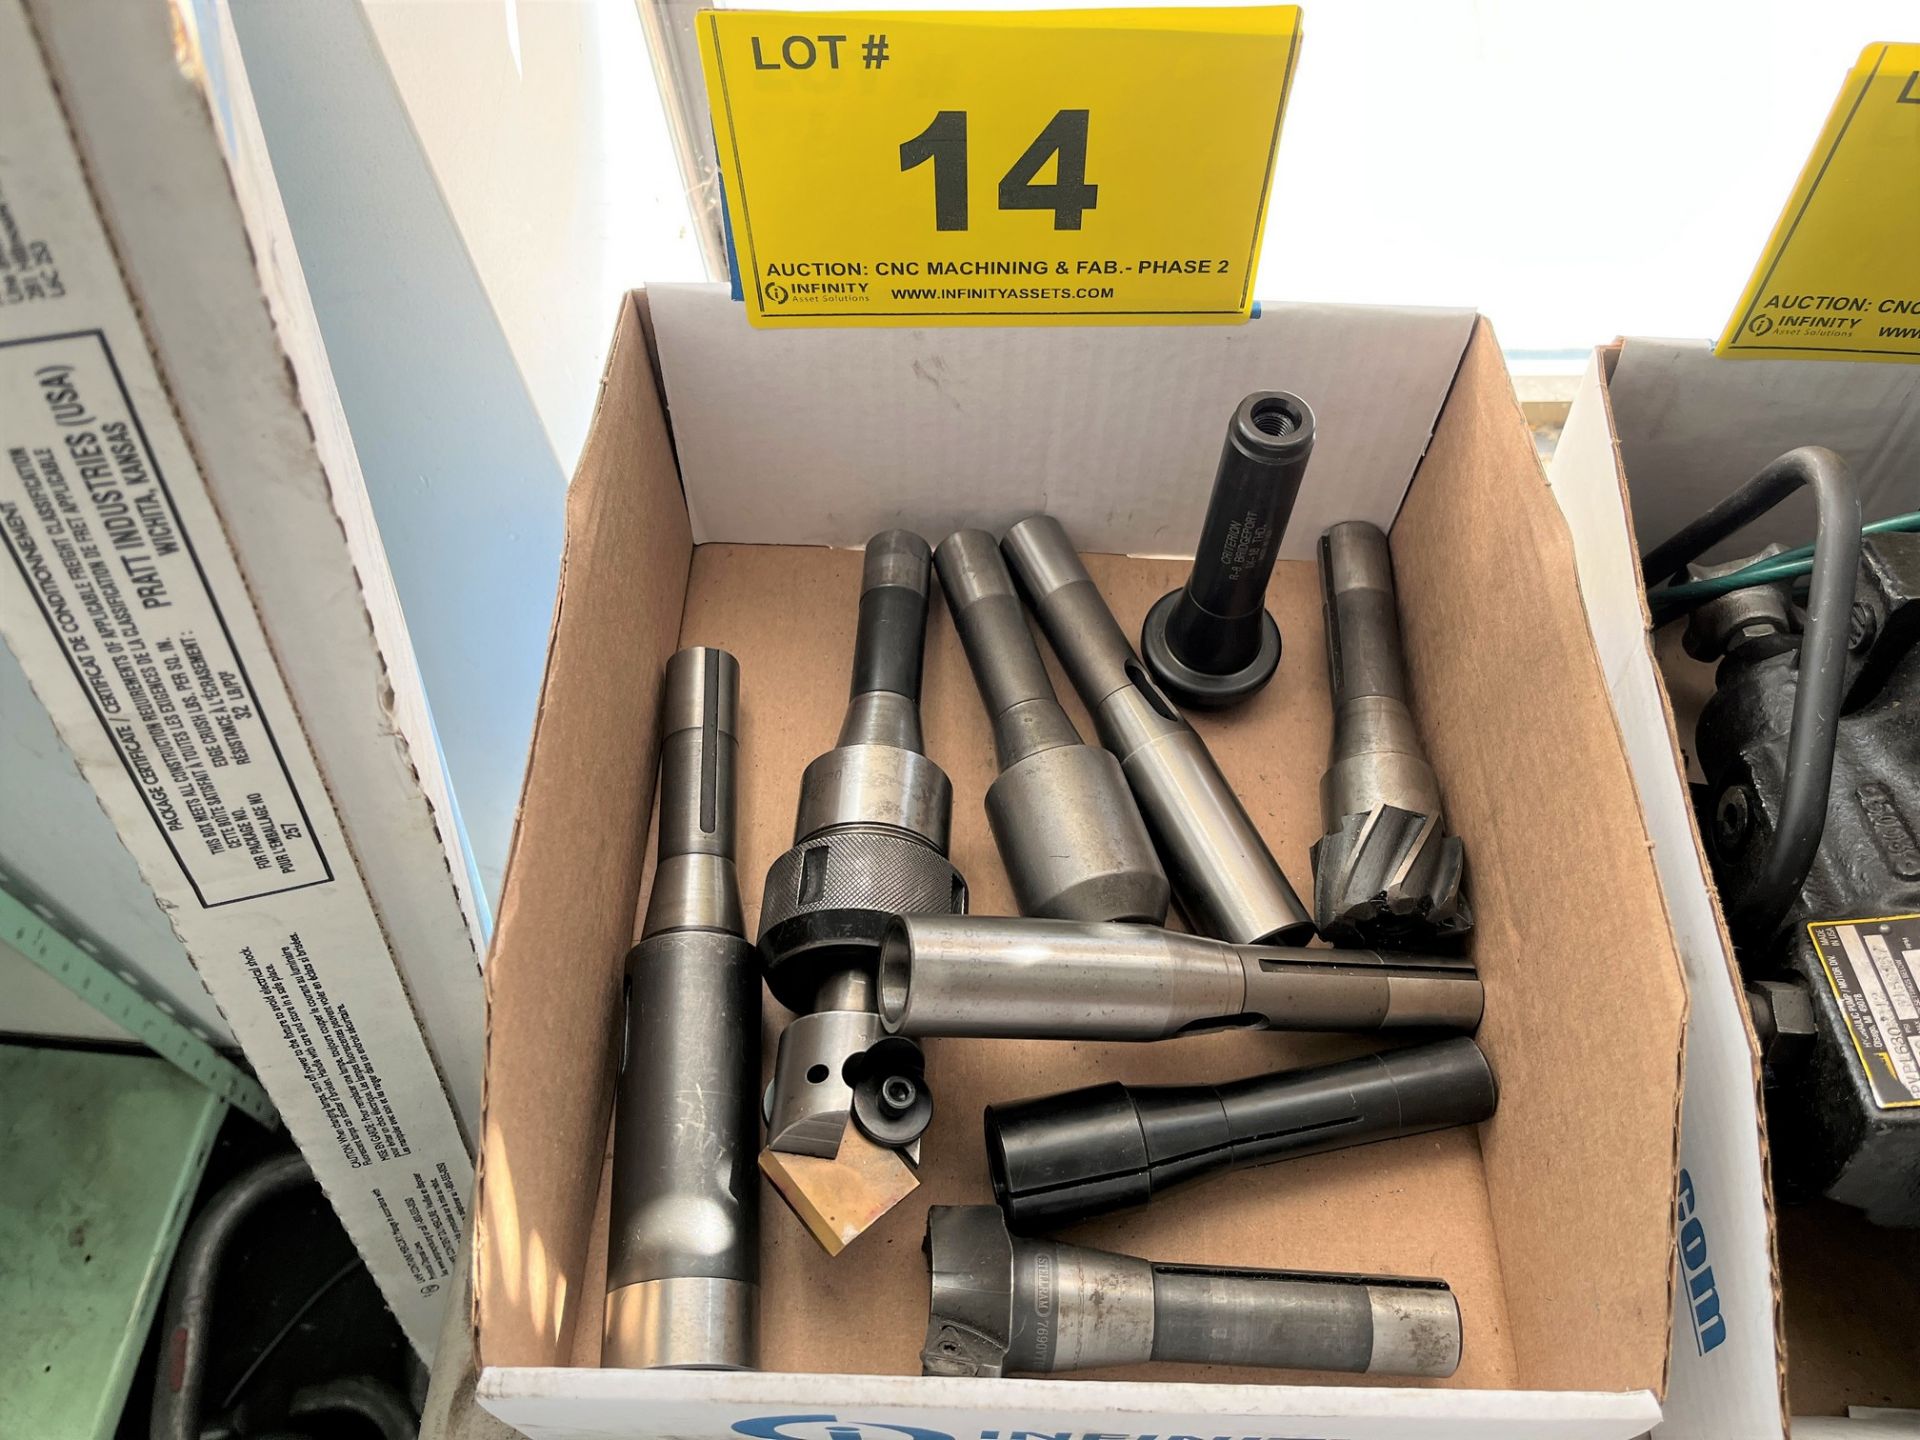 BOX OF TOOL HOLDERS W/ BORING / CUTTING ATTACHMENTS